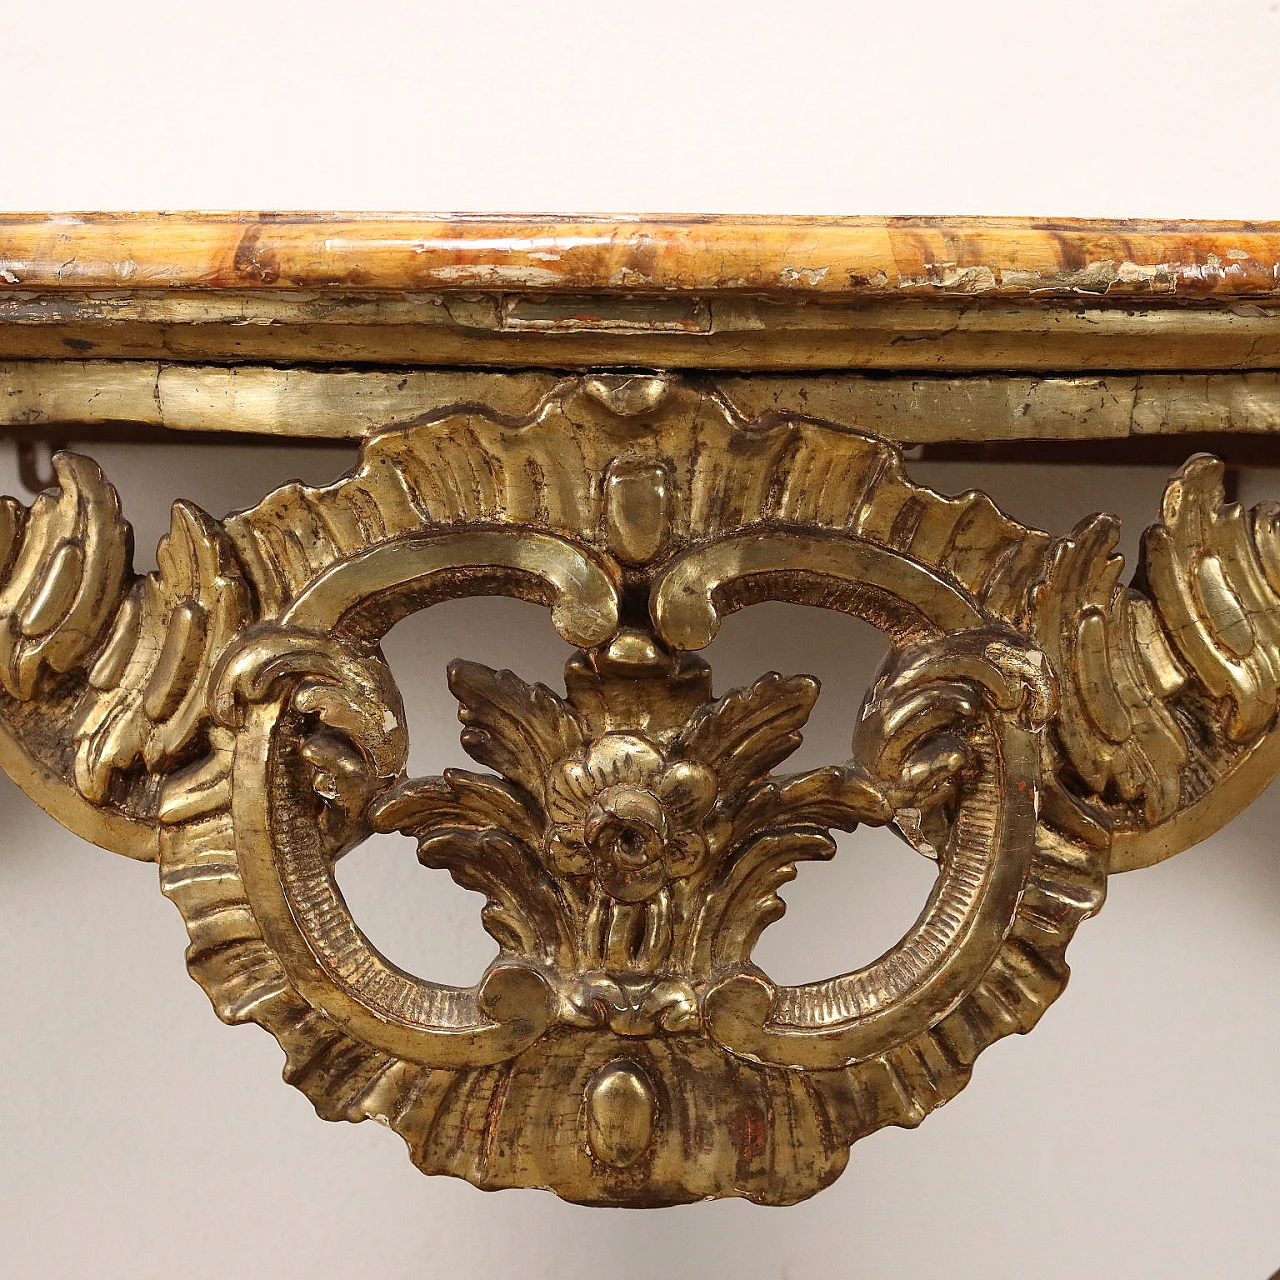 Baroque console table with lacquered marbled top, mid-18th century 4